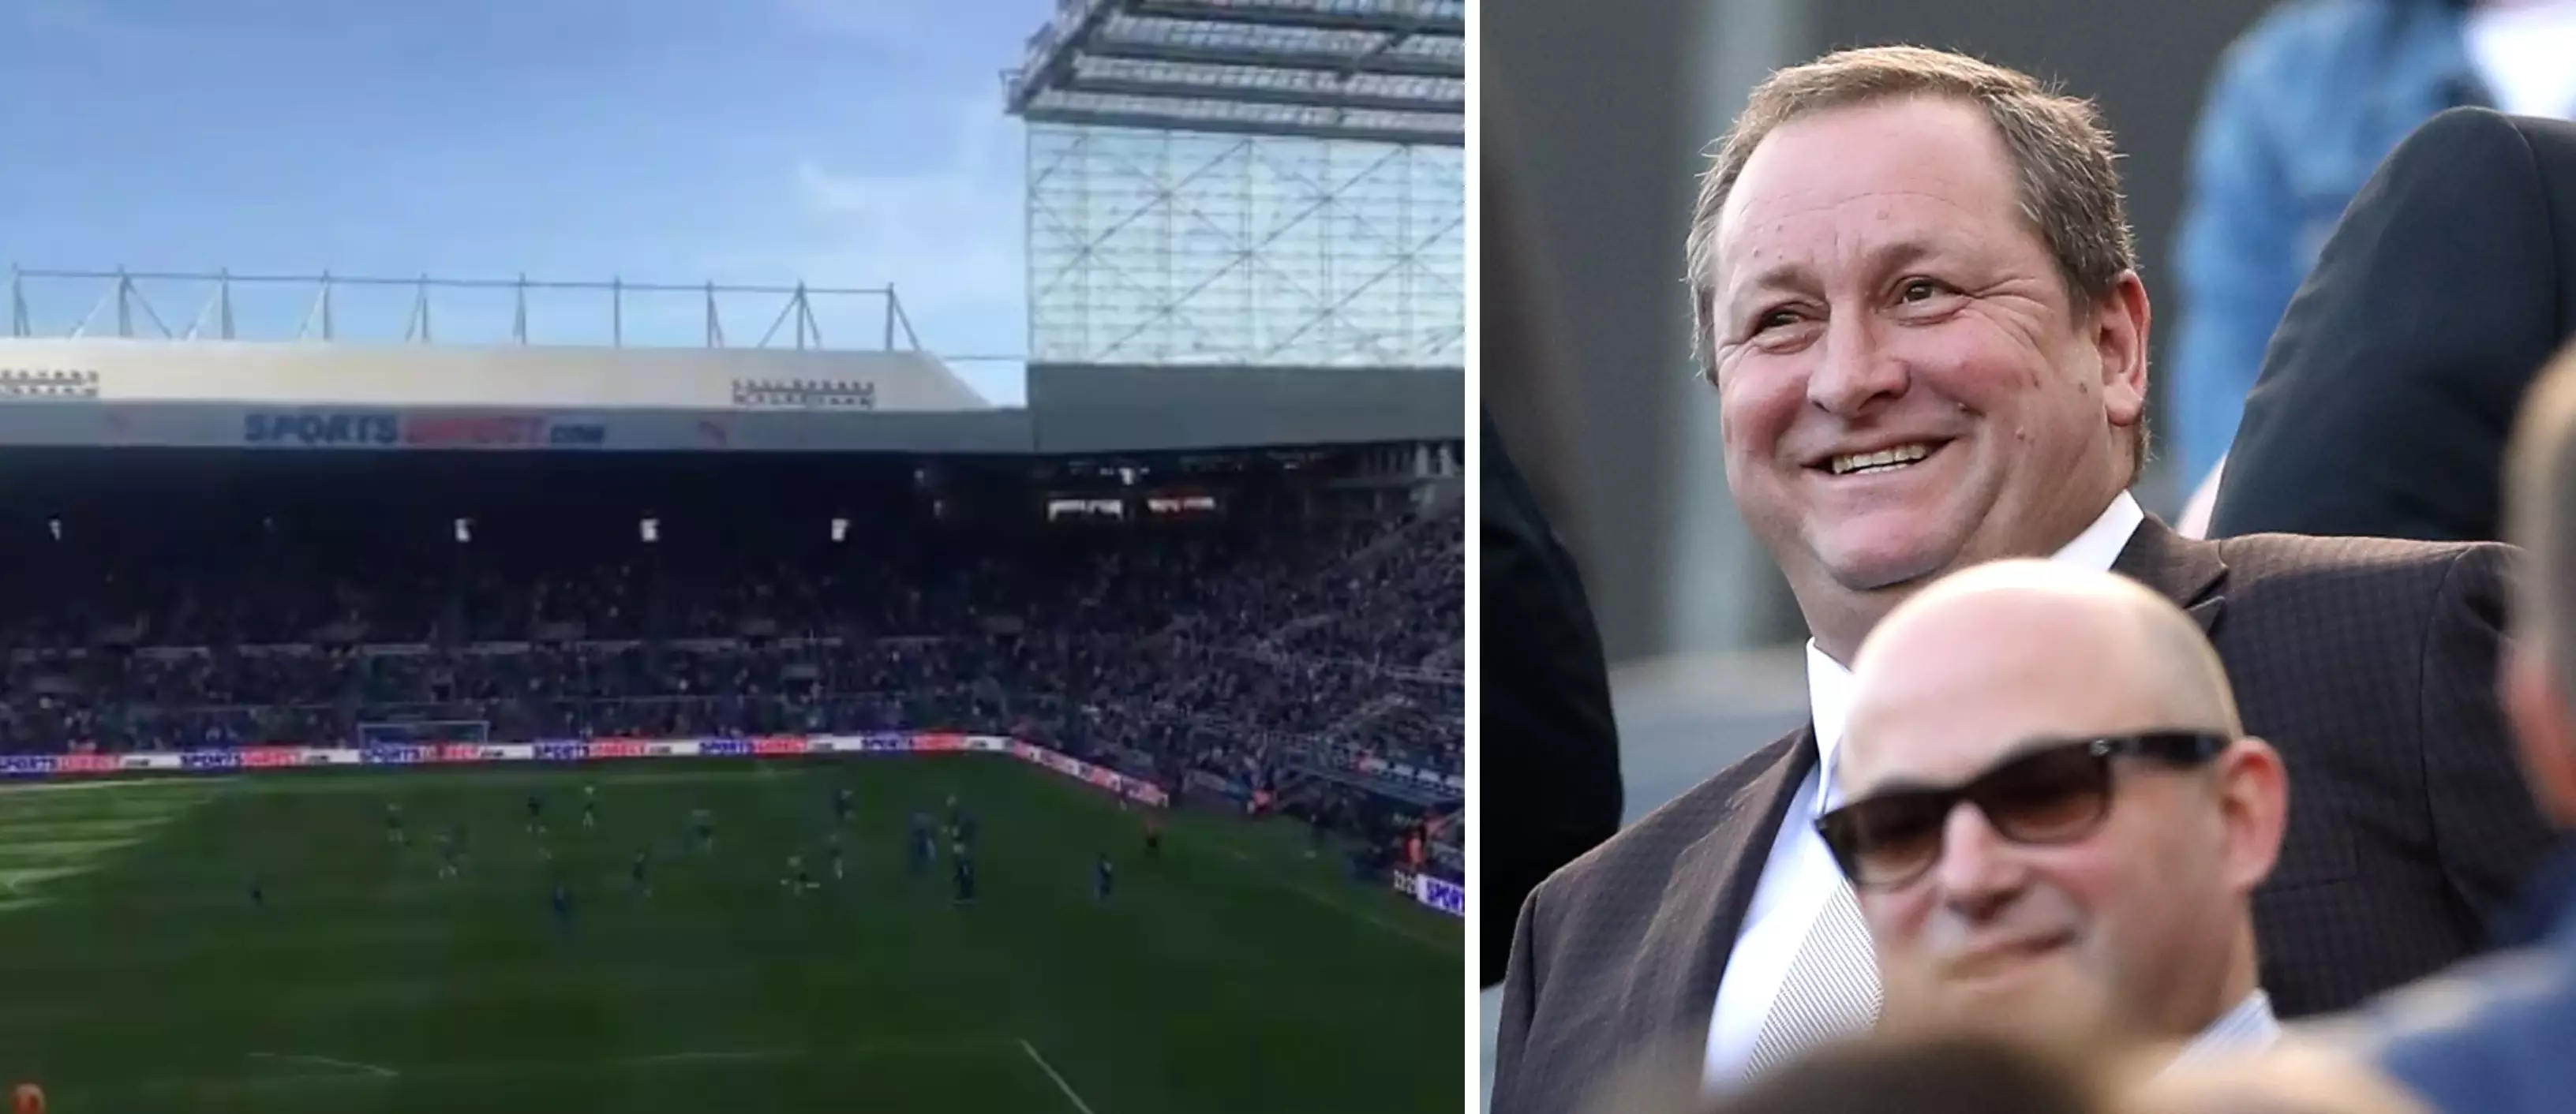 Mike Ashley Laughs At Newcastle Fans Chanting At Him In St James' Park